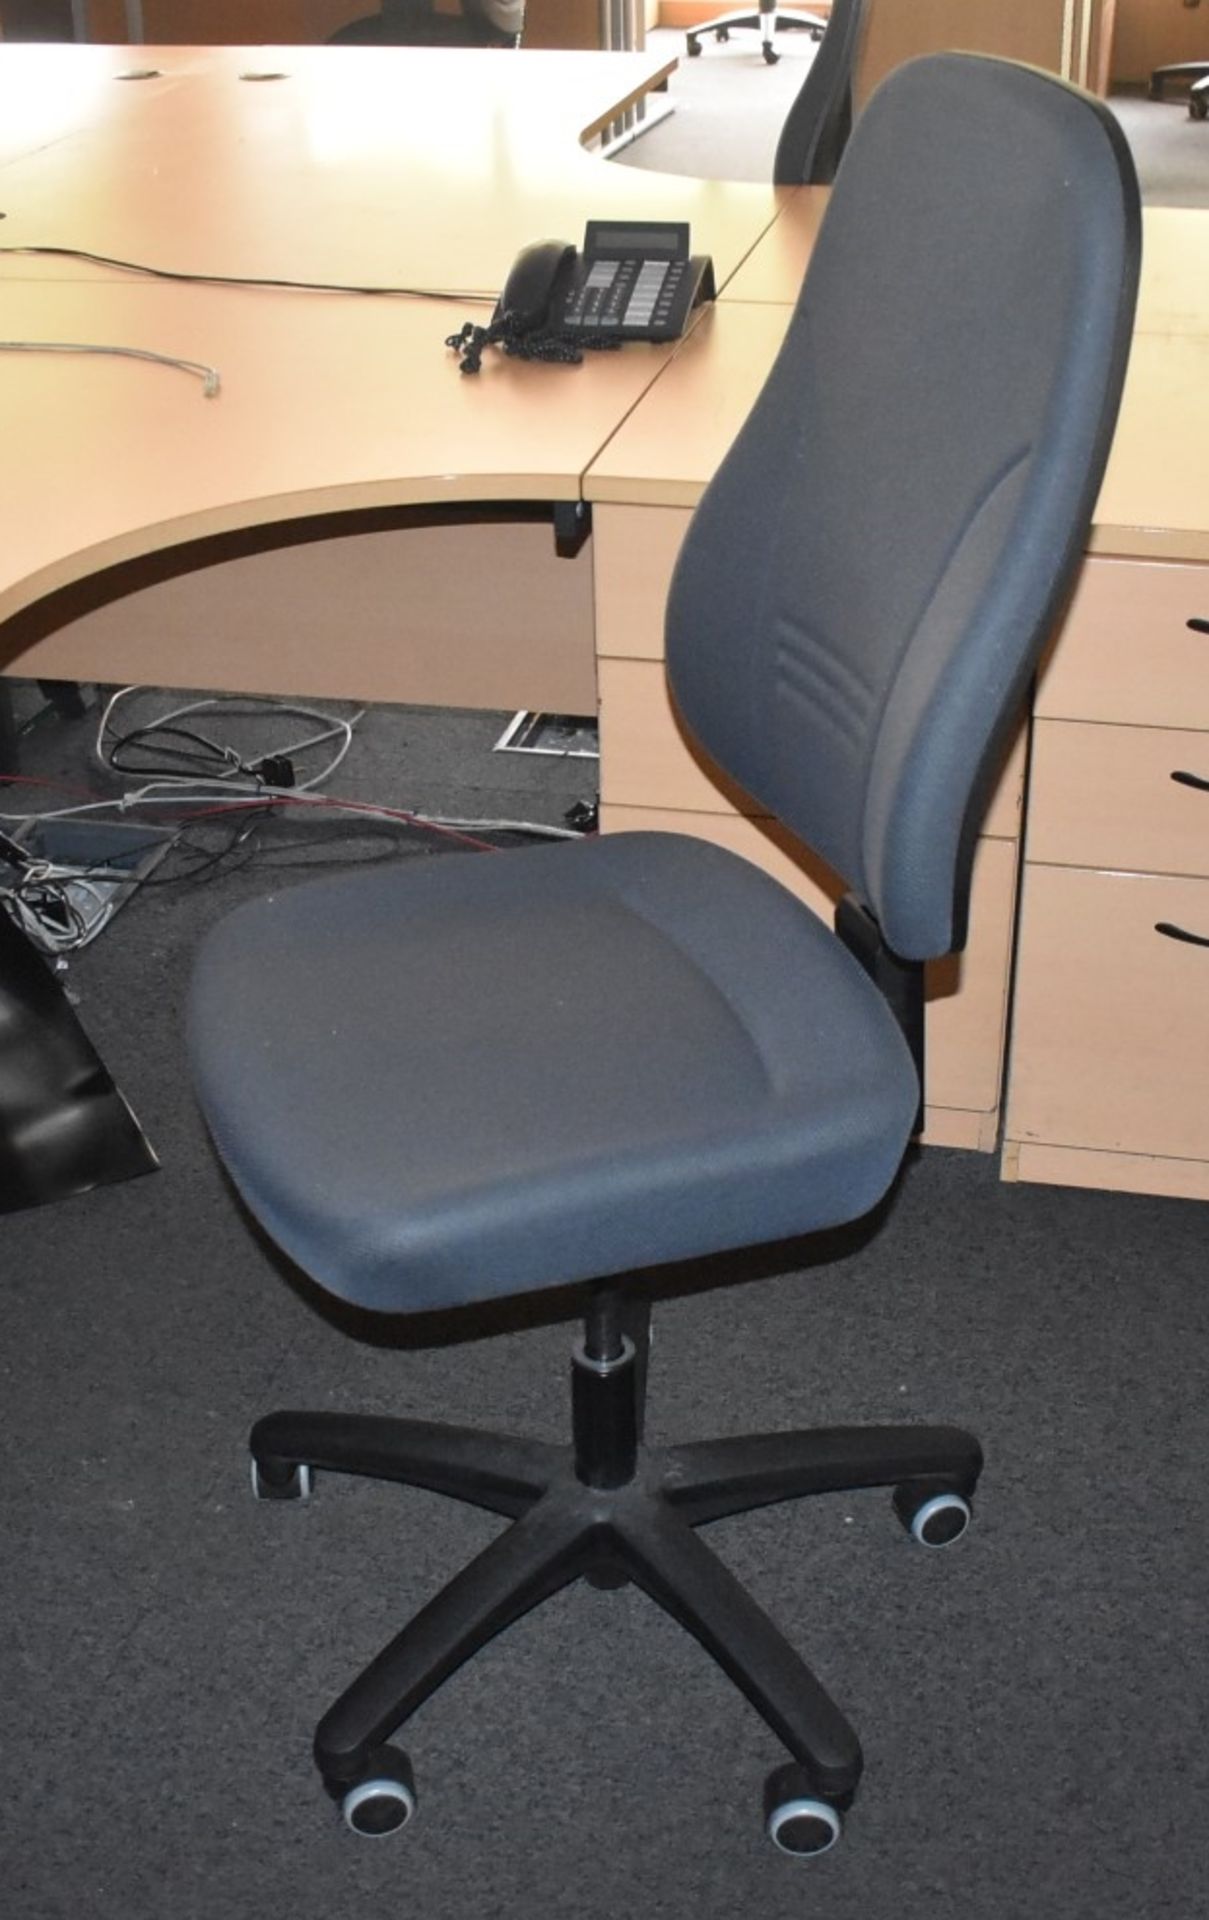 4 x Ergonomical Office Chairs in Grey - Gas Lift Height Adjustable - CL529 - Location: Wakefield - Image 6 of 6